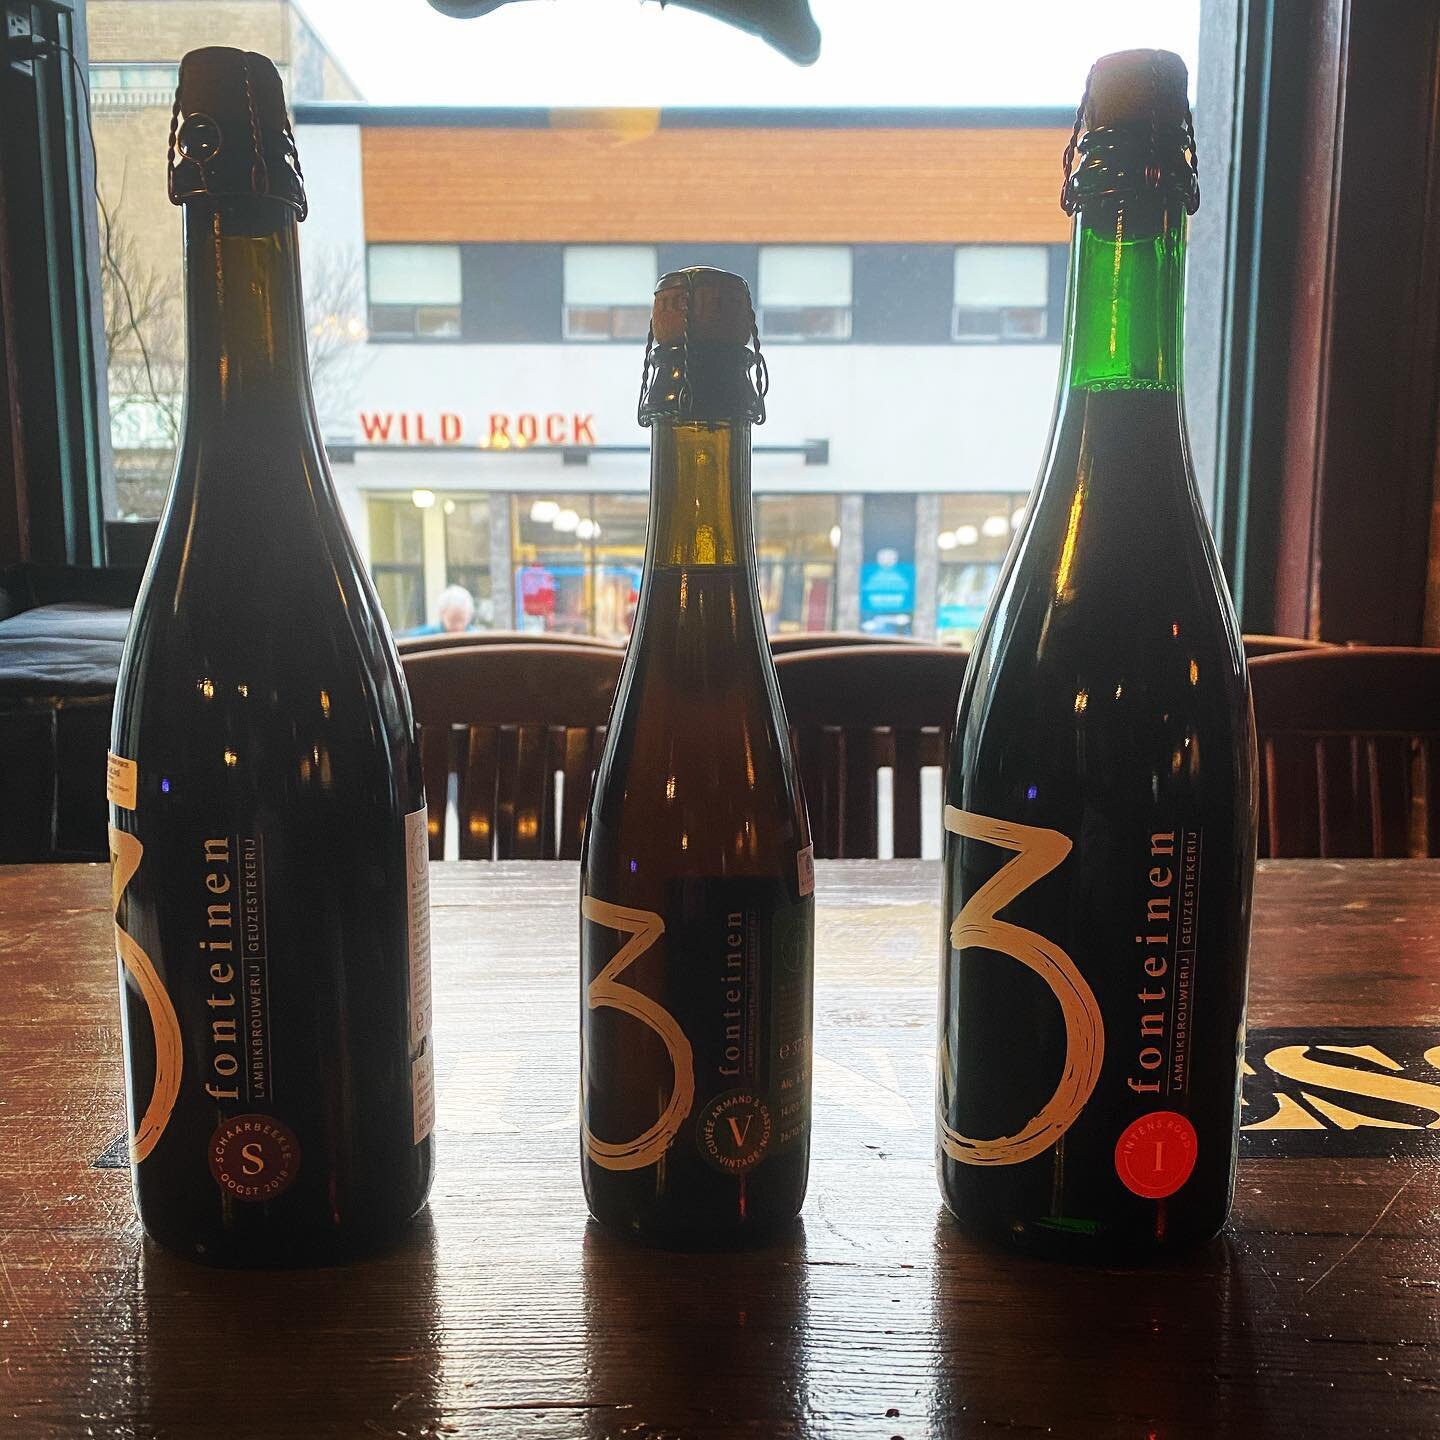 Super rare @3fonteinen arrived at the pub! Limited supplies. #lambiclovers #downtownptbo #beerbar